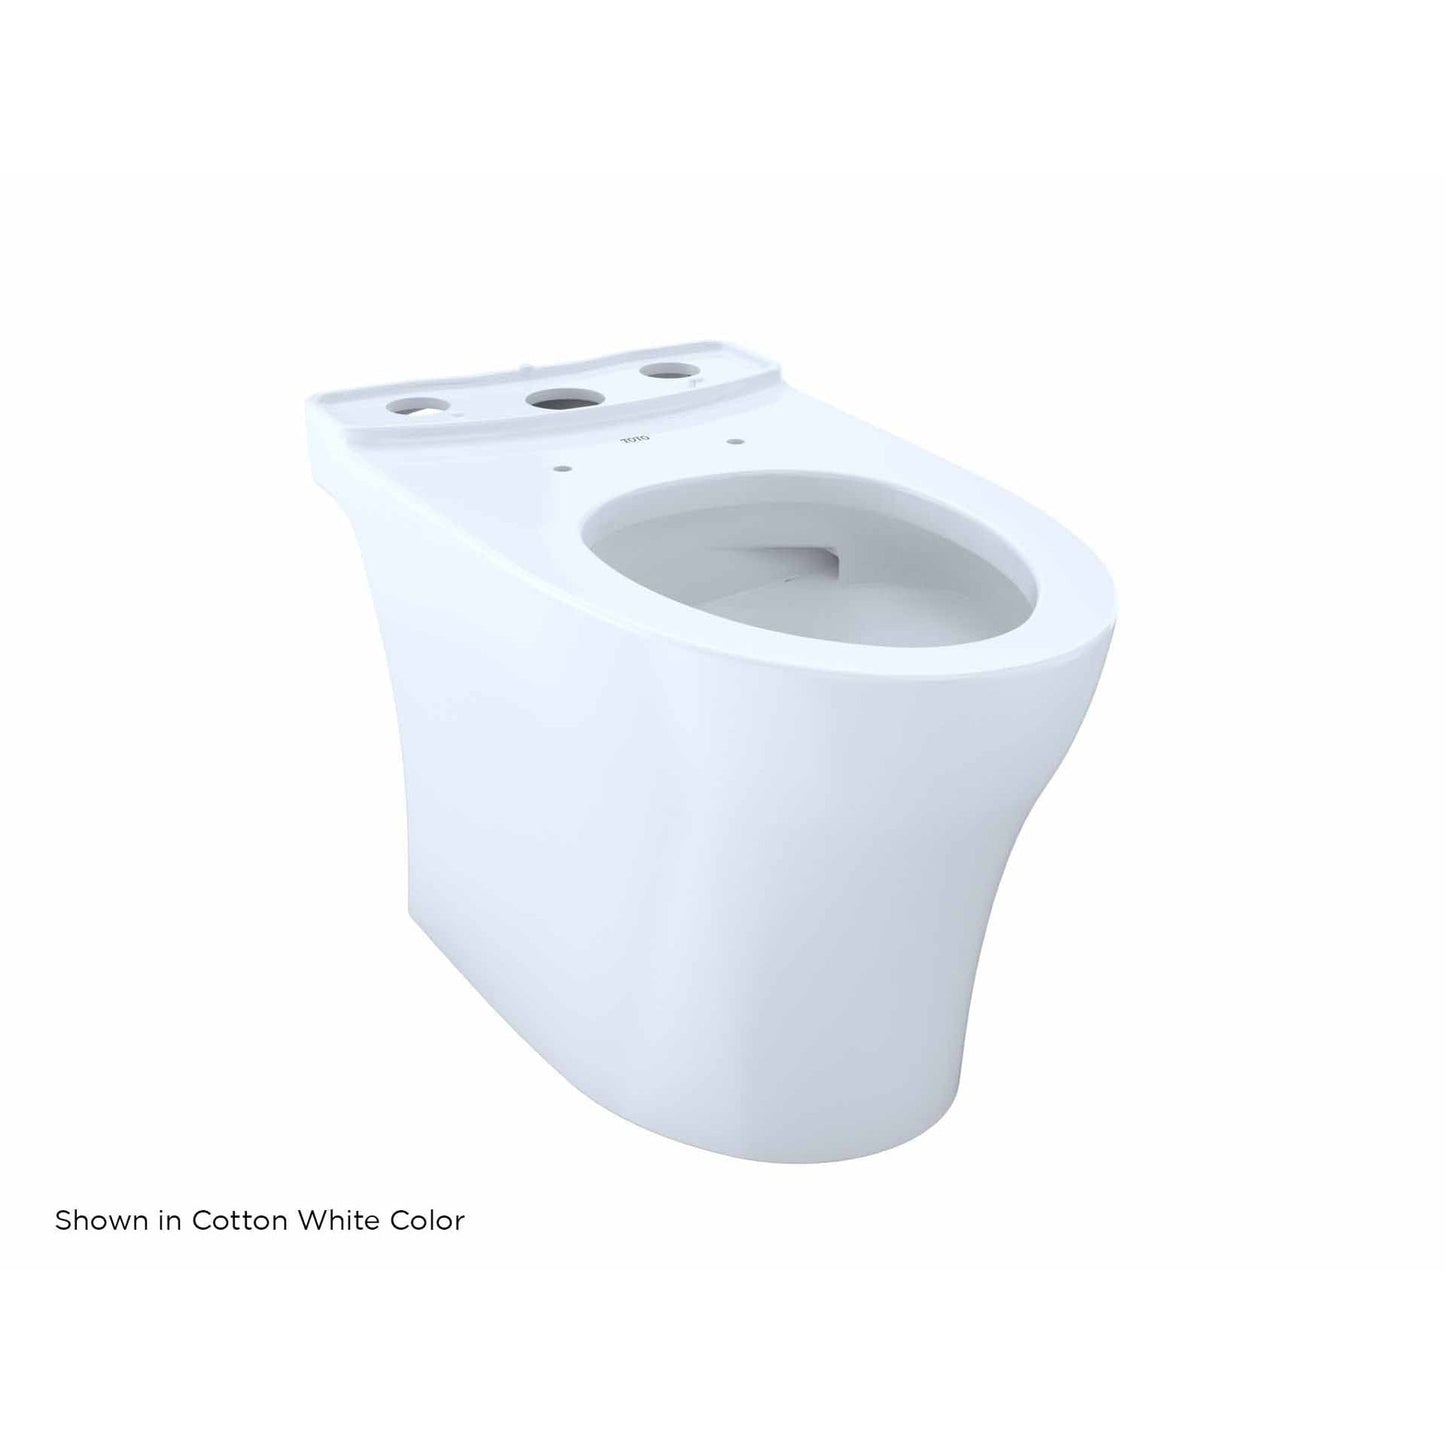 TOTO Aquia IV Ebony 1.0 GPF & 0.8 GPF Dual-Flush Two-Piece Elongated Chair Height Toilet With WASHLET+ Connection - SoftClose Seat Included